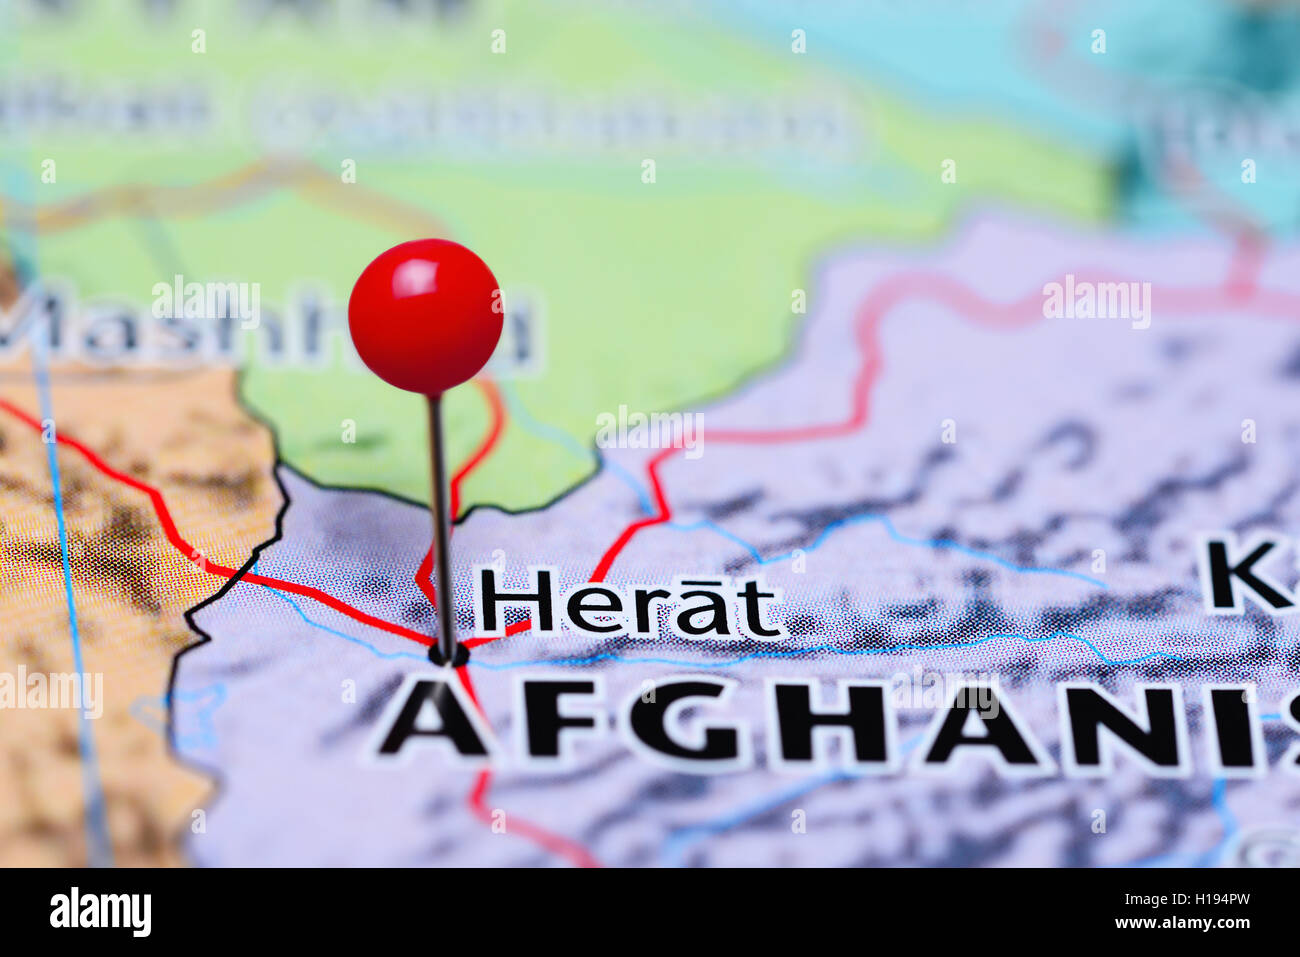 Herat pinned on a map of Afghanistan Stock Photo